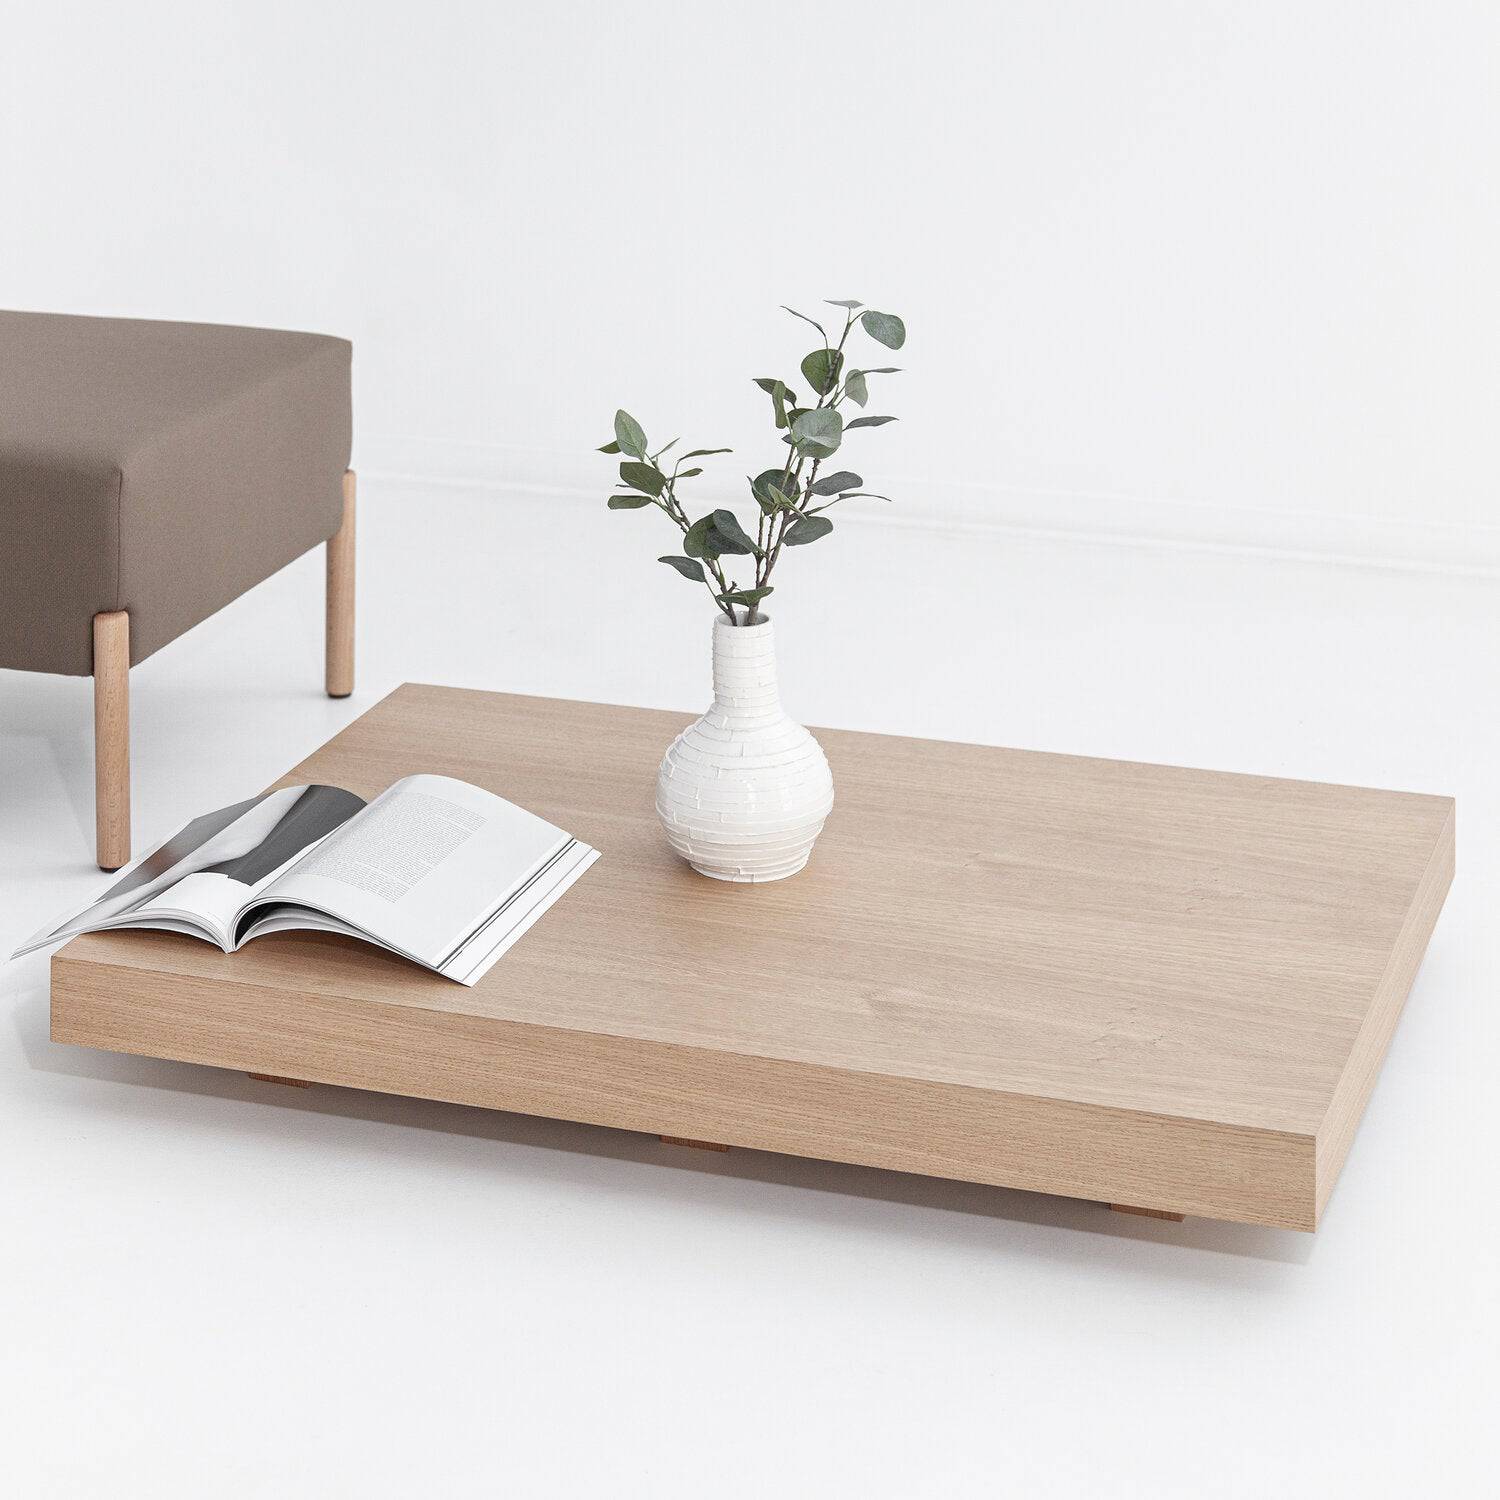 Zeus Coffee Table - THAT COOL LIVING